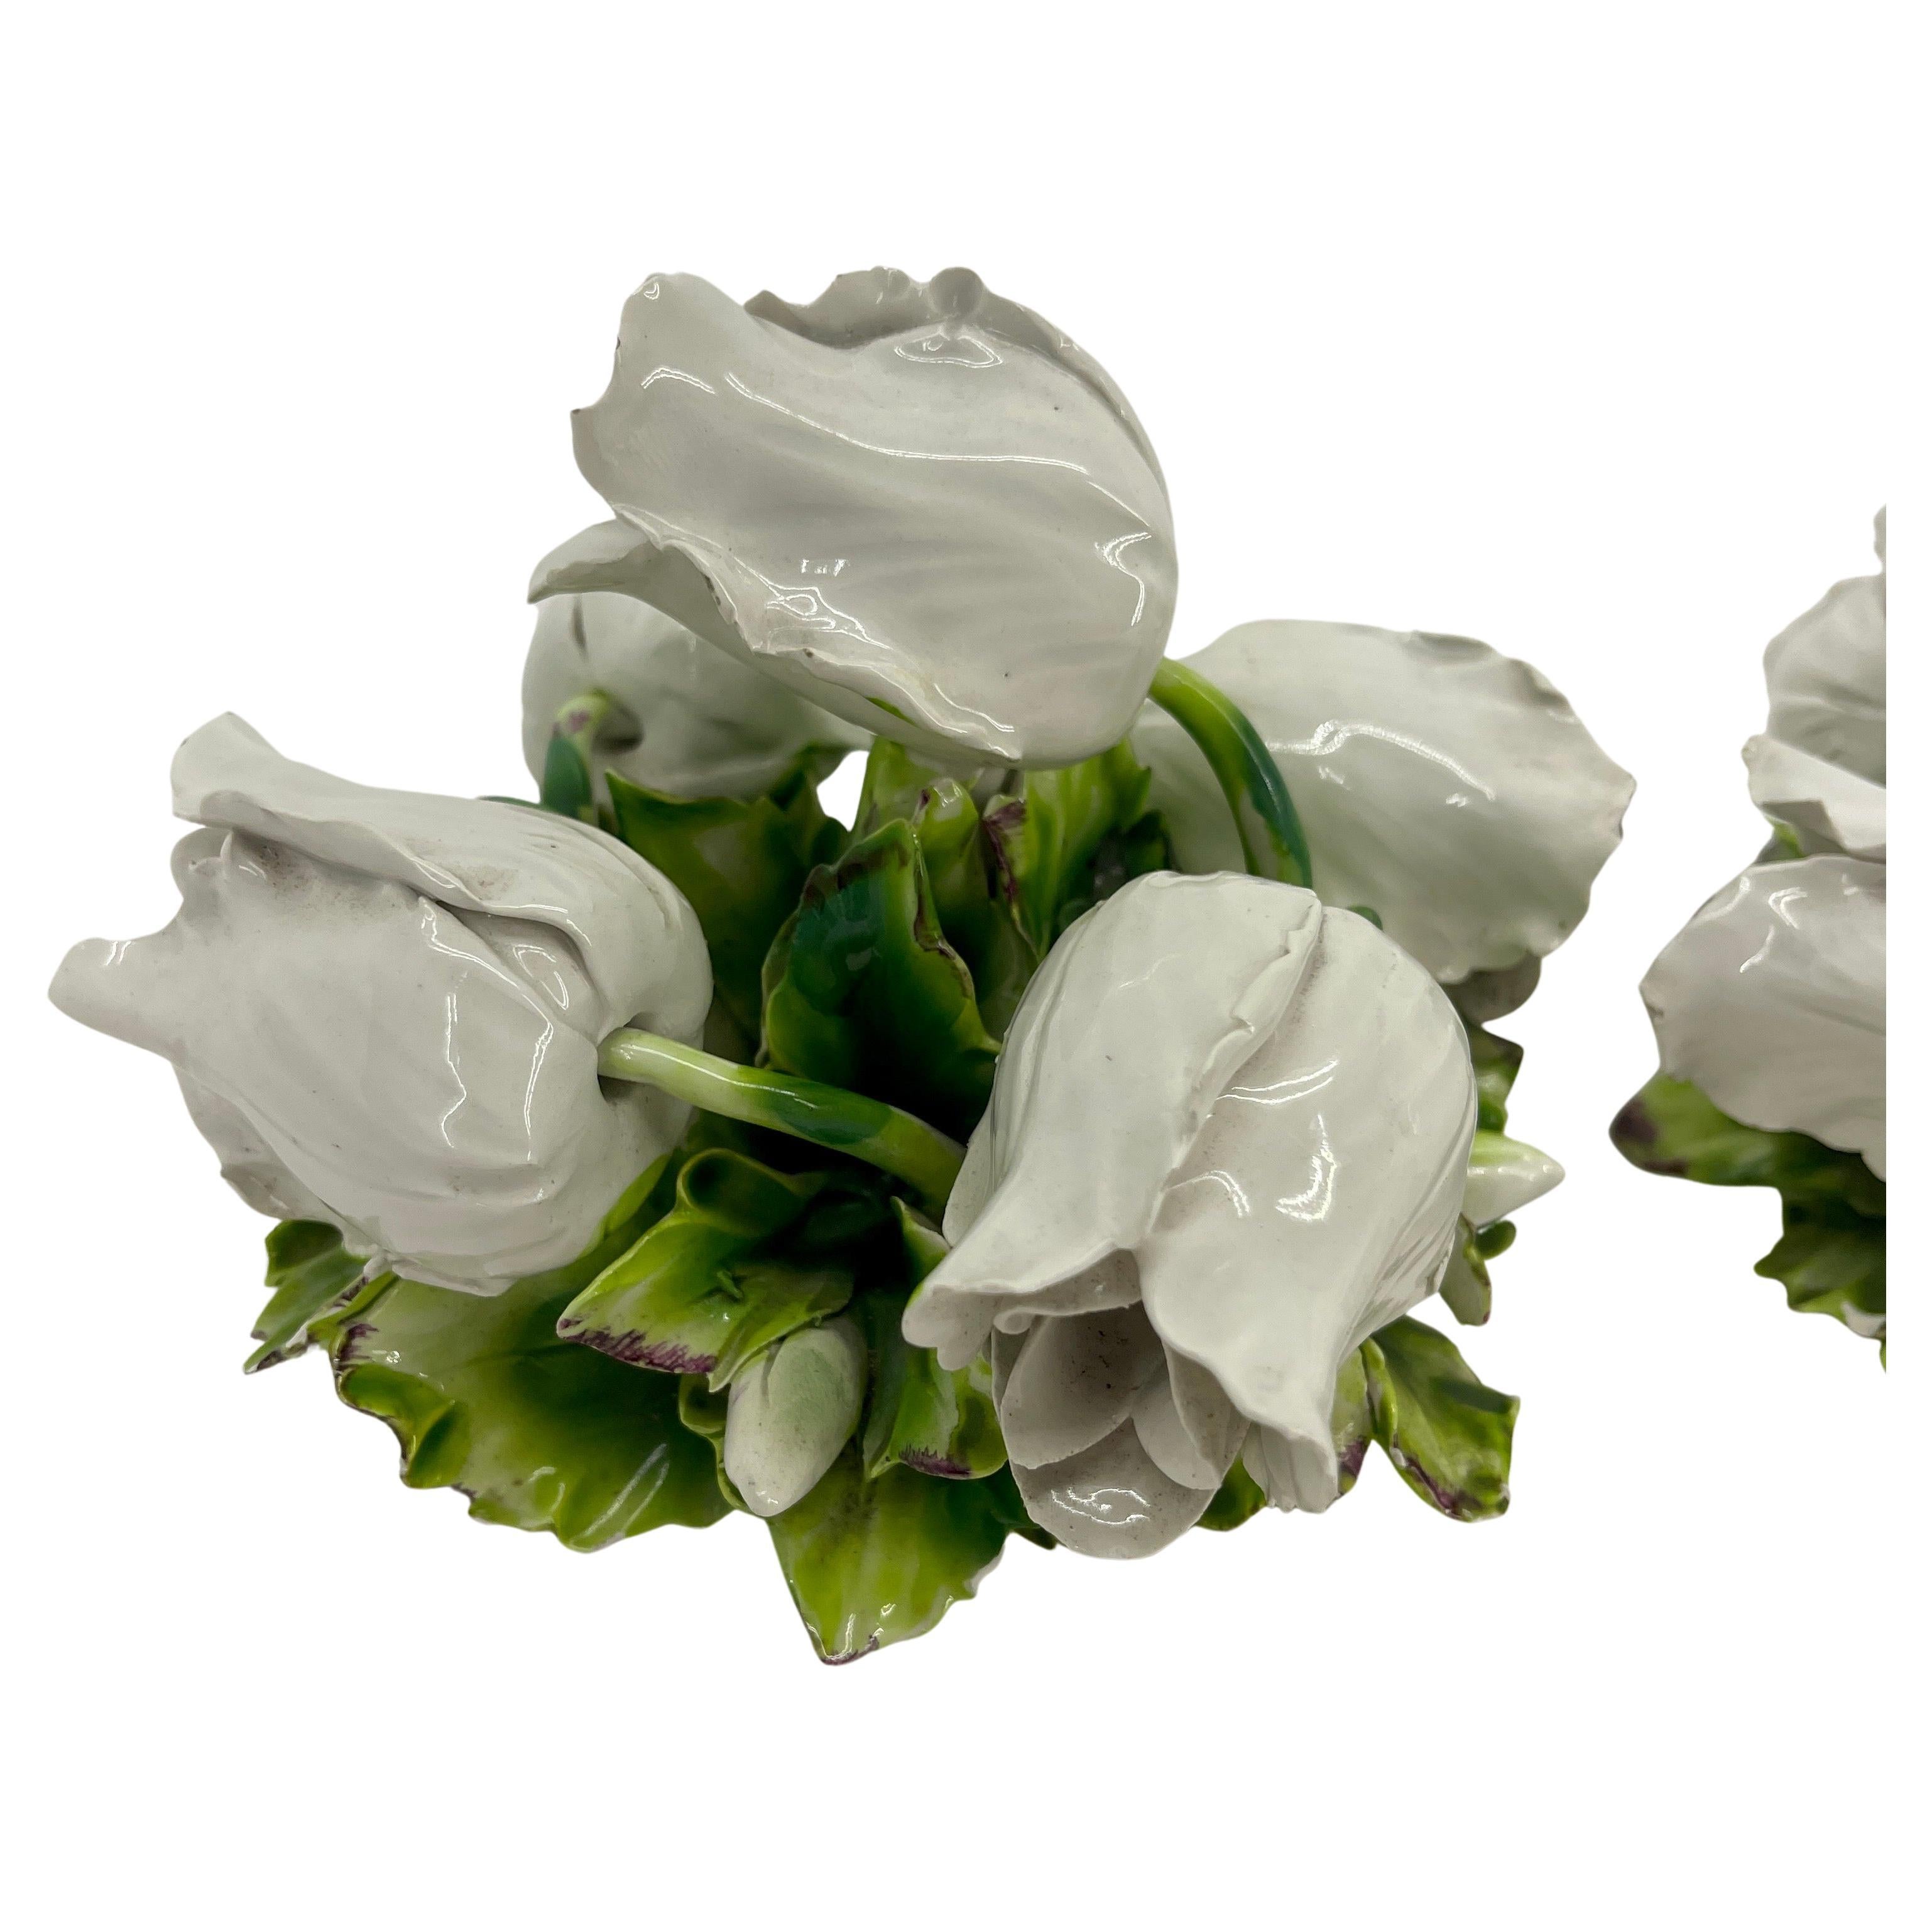 Pair of Vintage Italian Ceramic White Tulip Centerpieces In Good Condition For Sale In Haddonfield, NJ